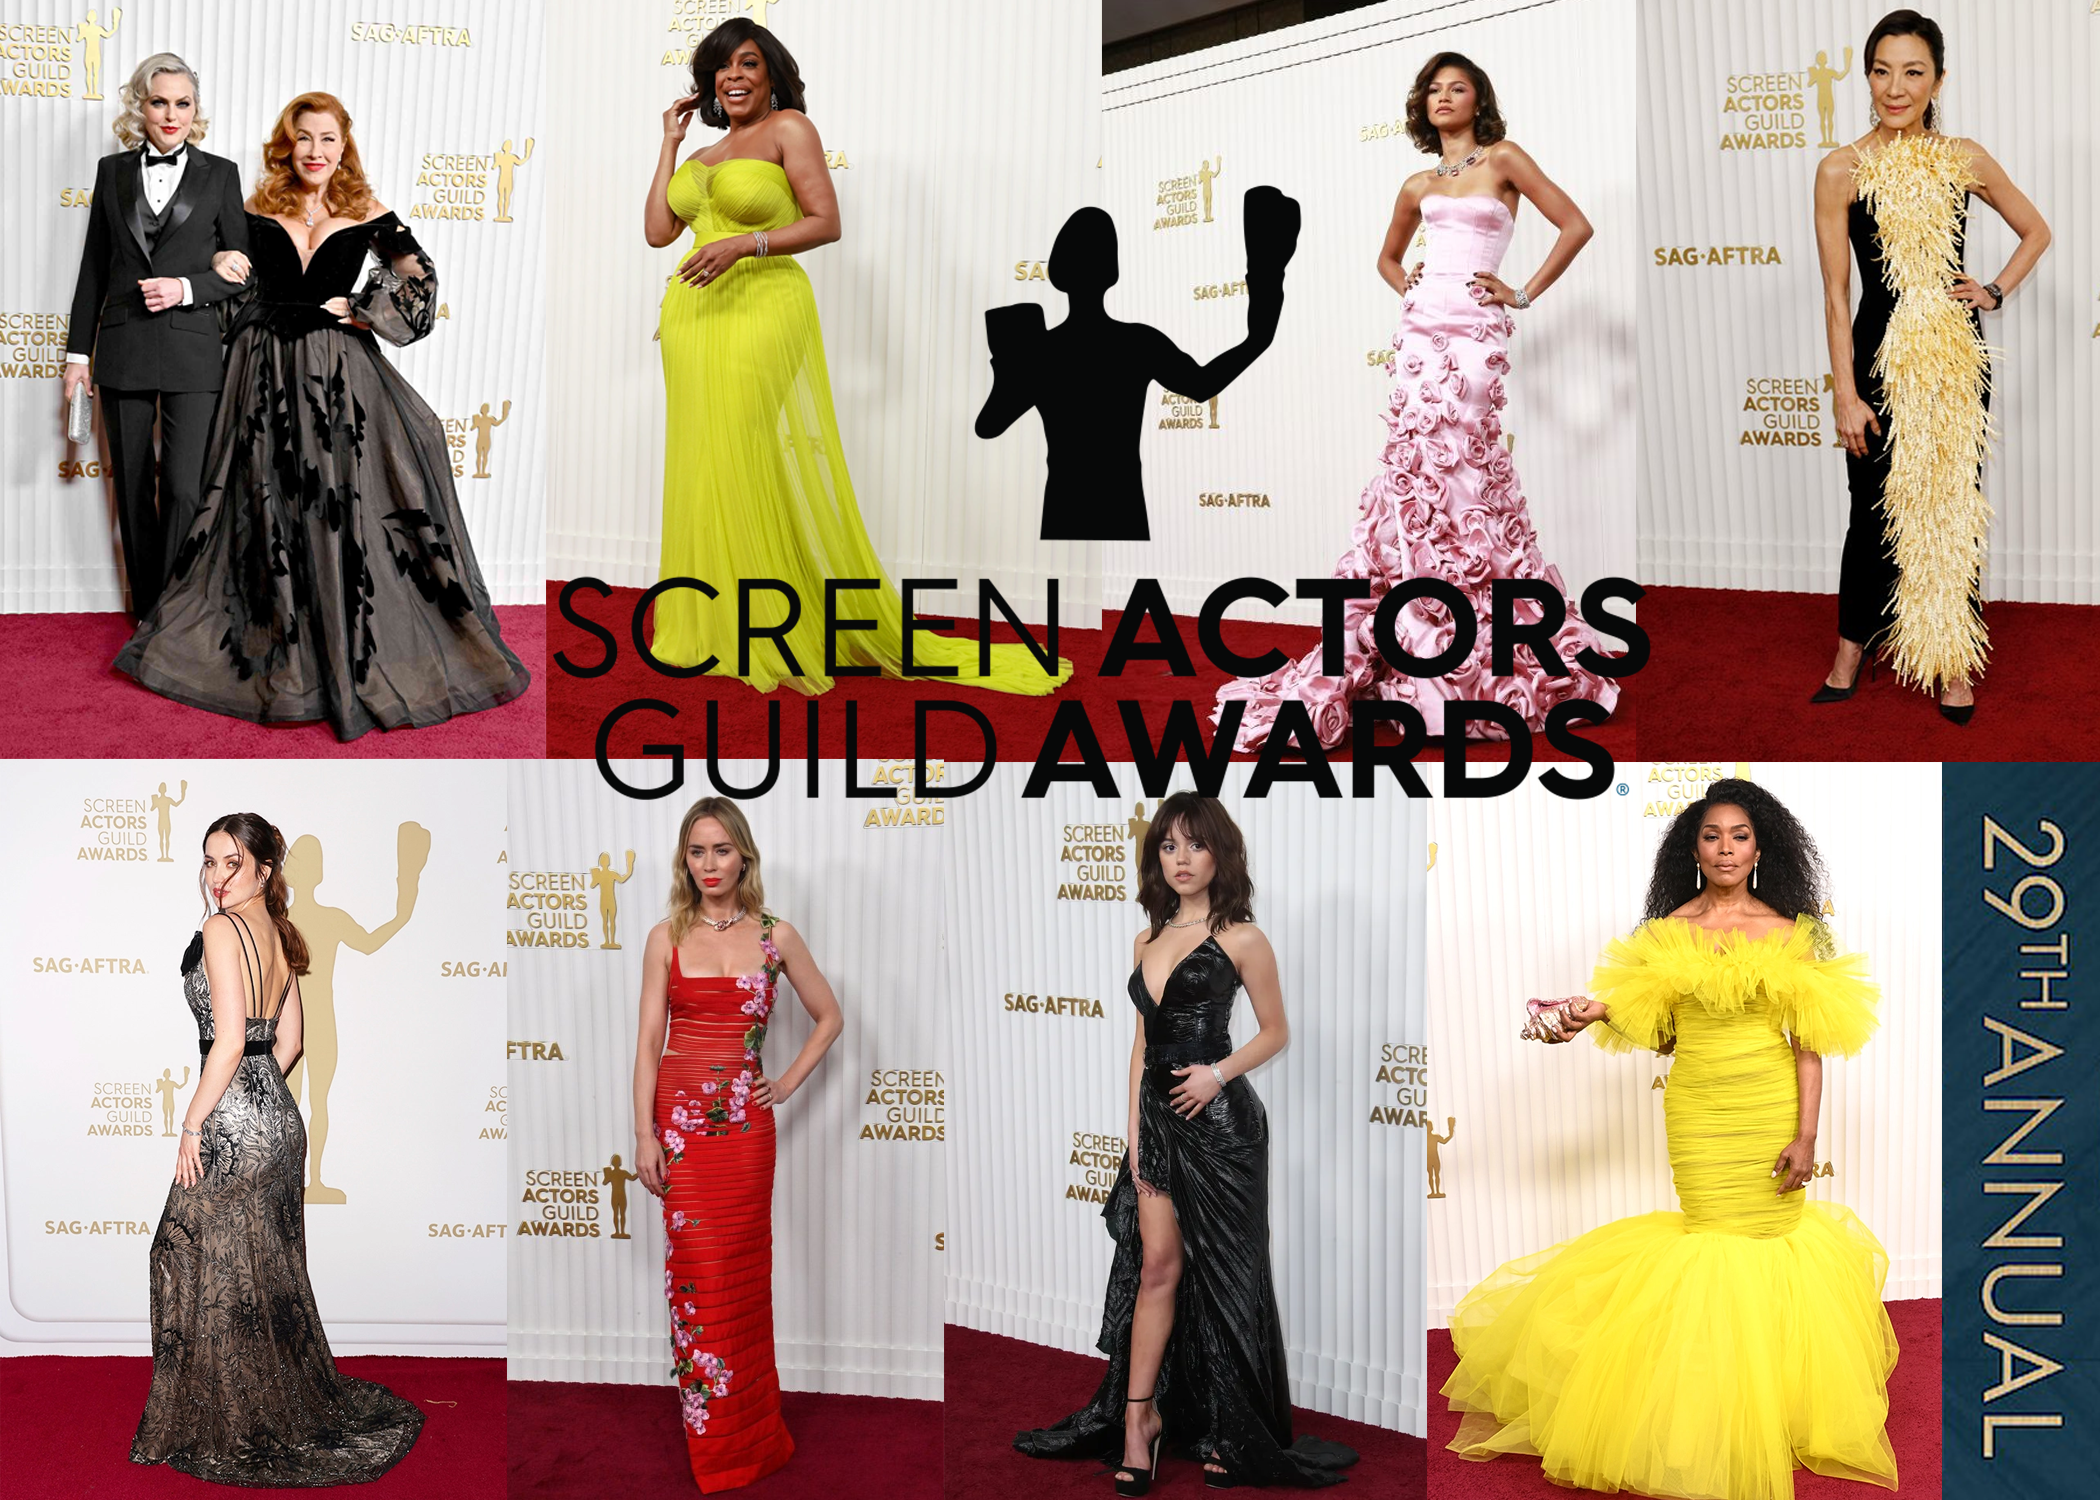 Screen Actors Guild Award fashion featured colorful romantic or